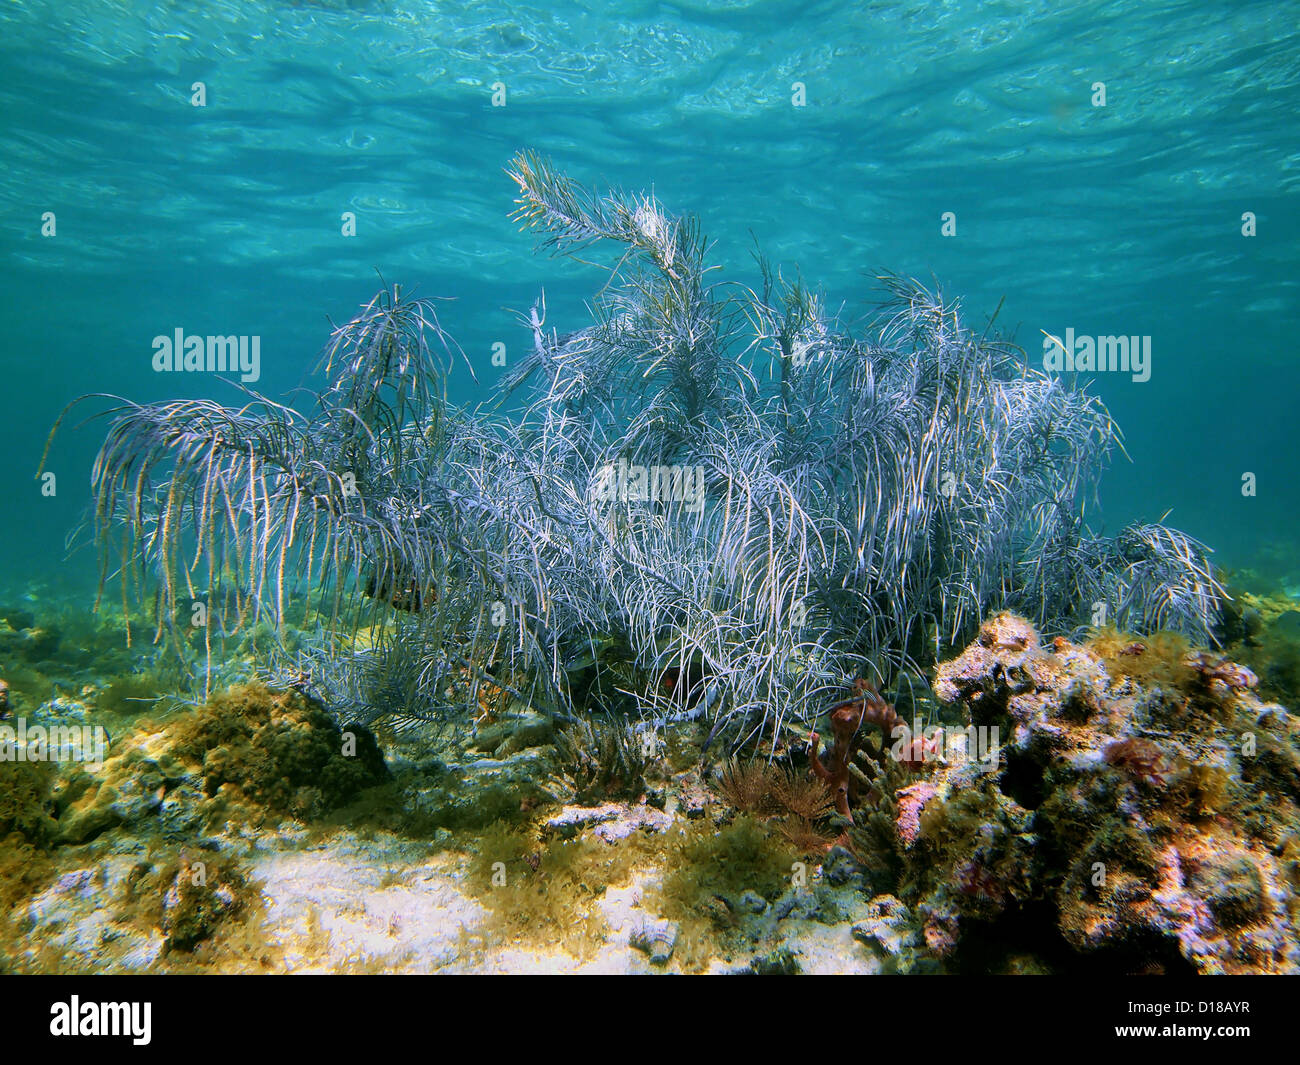 Sea plume Gorgonian in a shallow coral reef with water surface in background, Bahamas Stock Photo